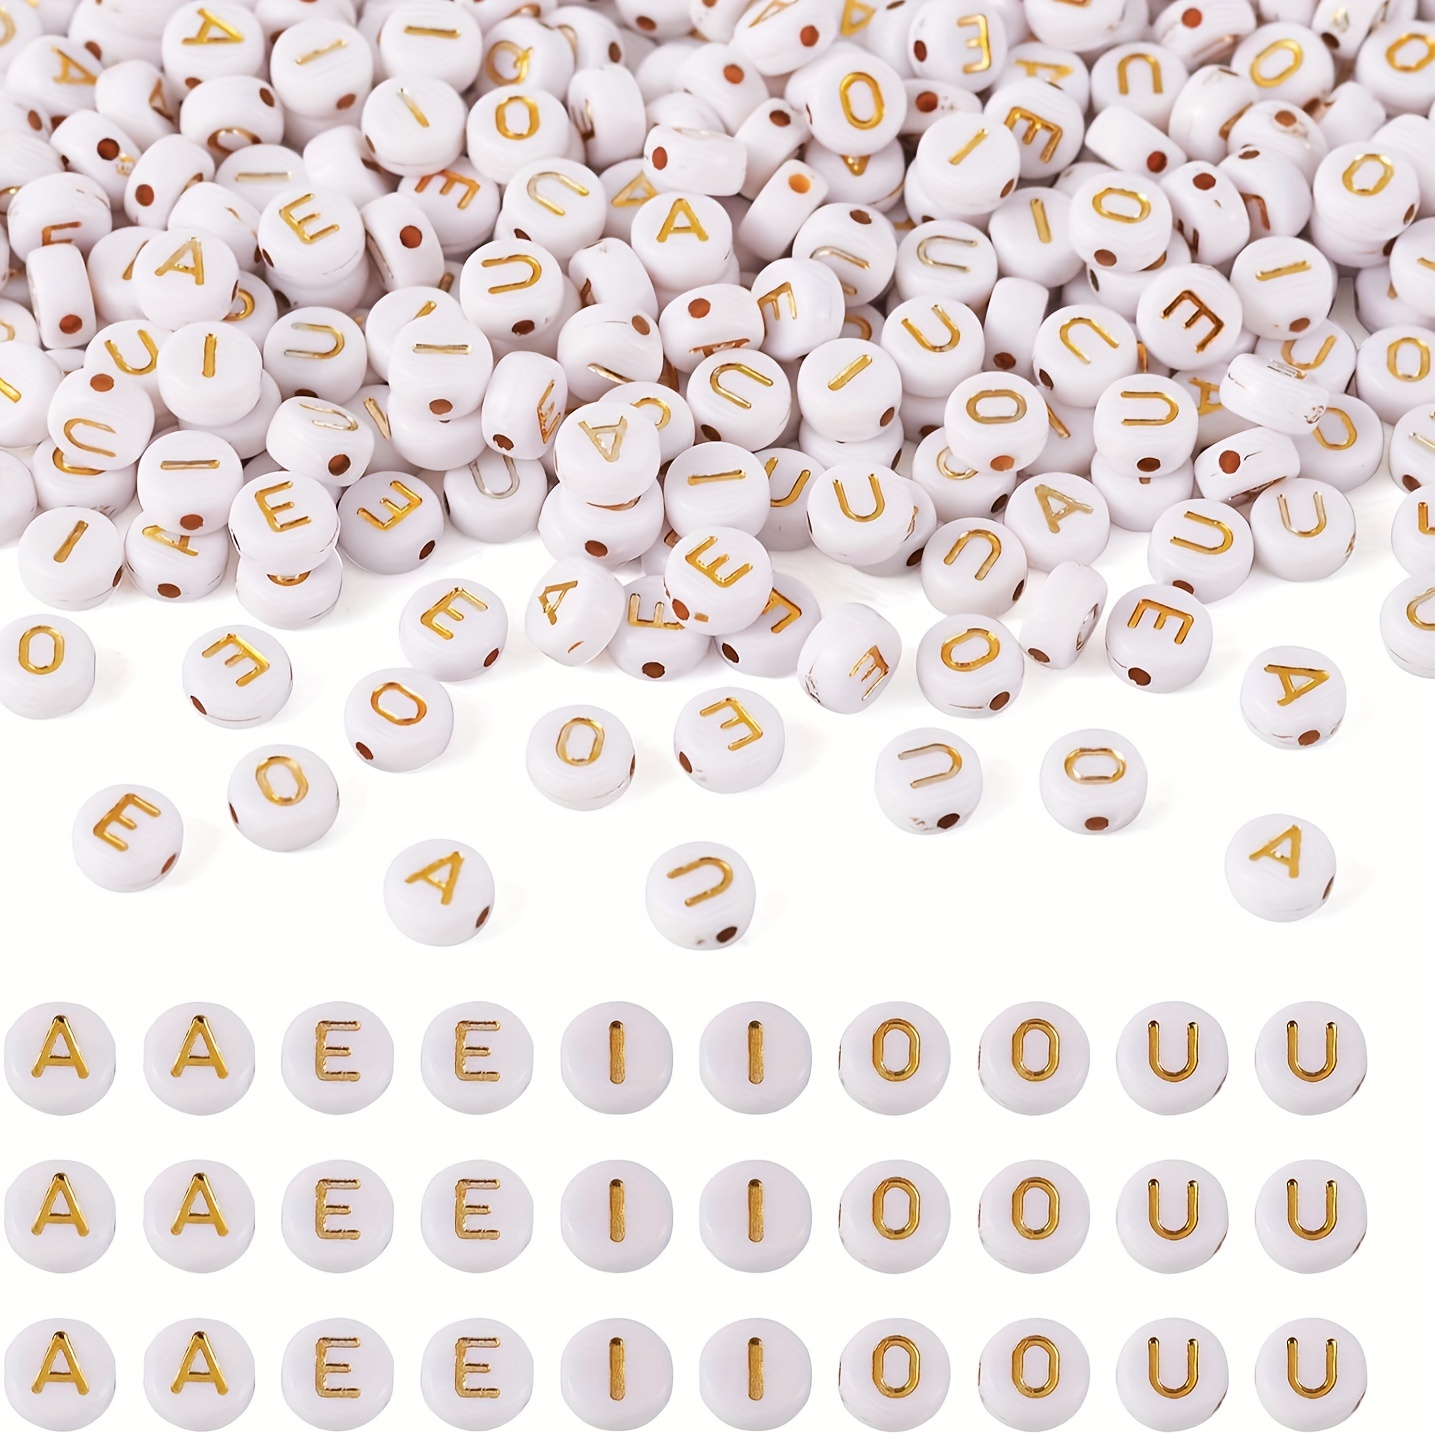 Generic 20pcs White/Golden / Beads Crafts For @ Best Price Online